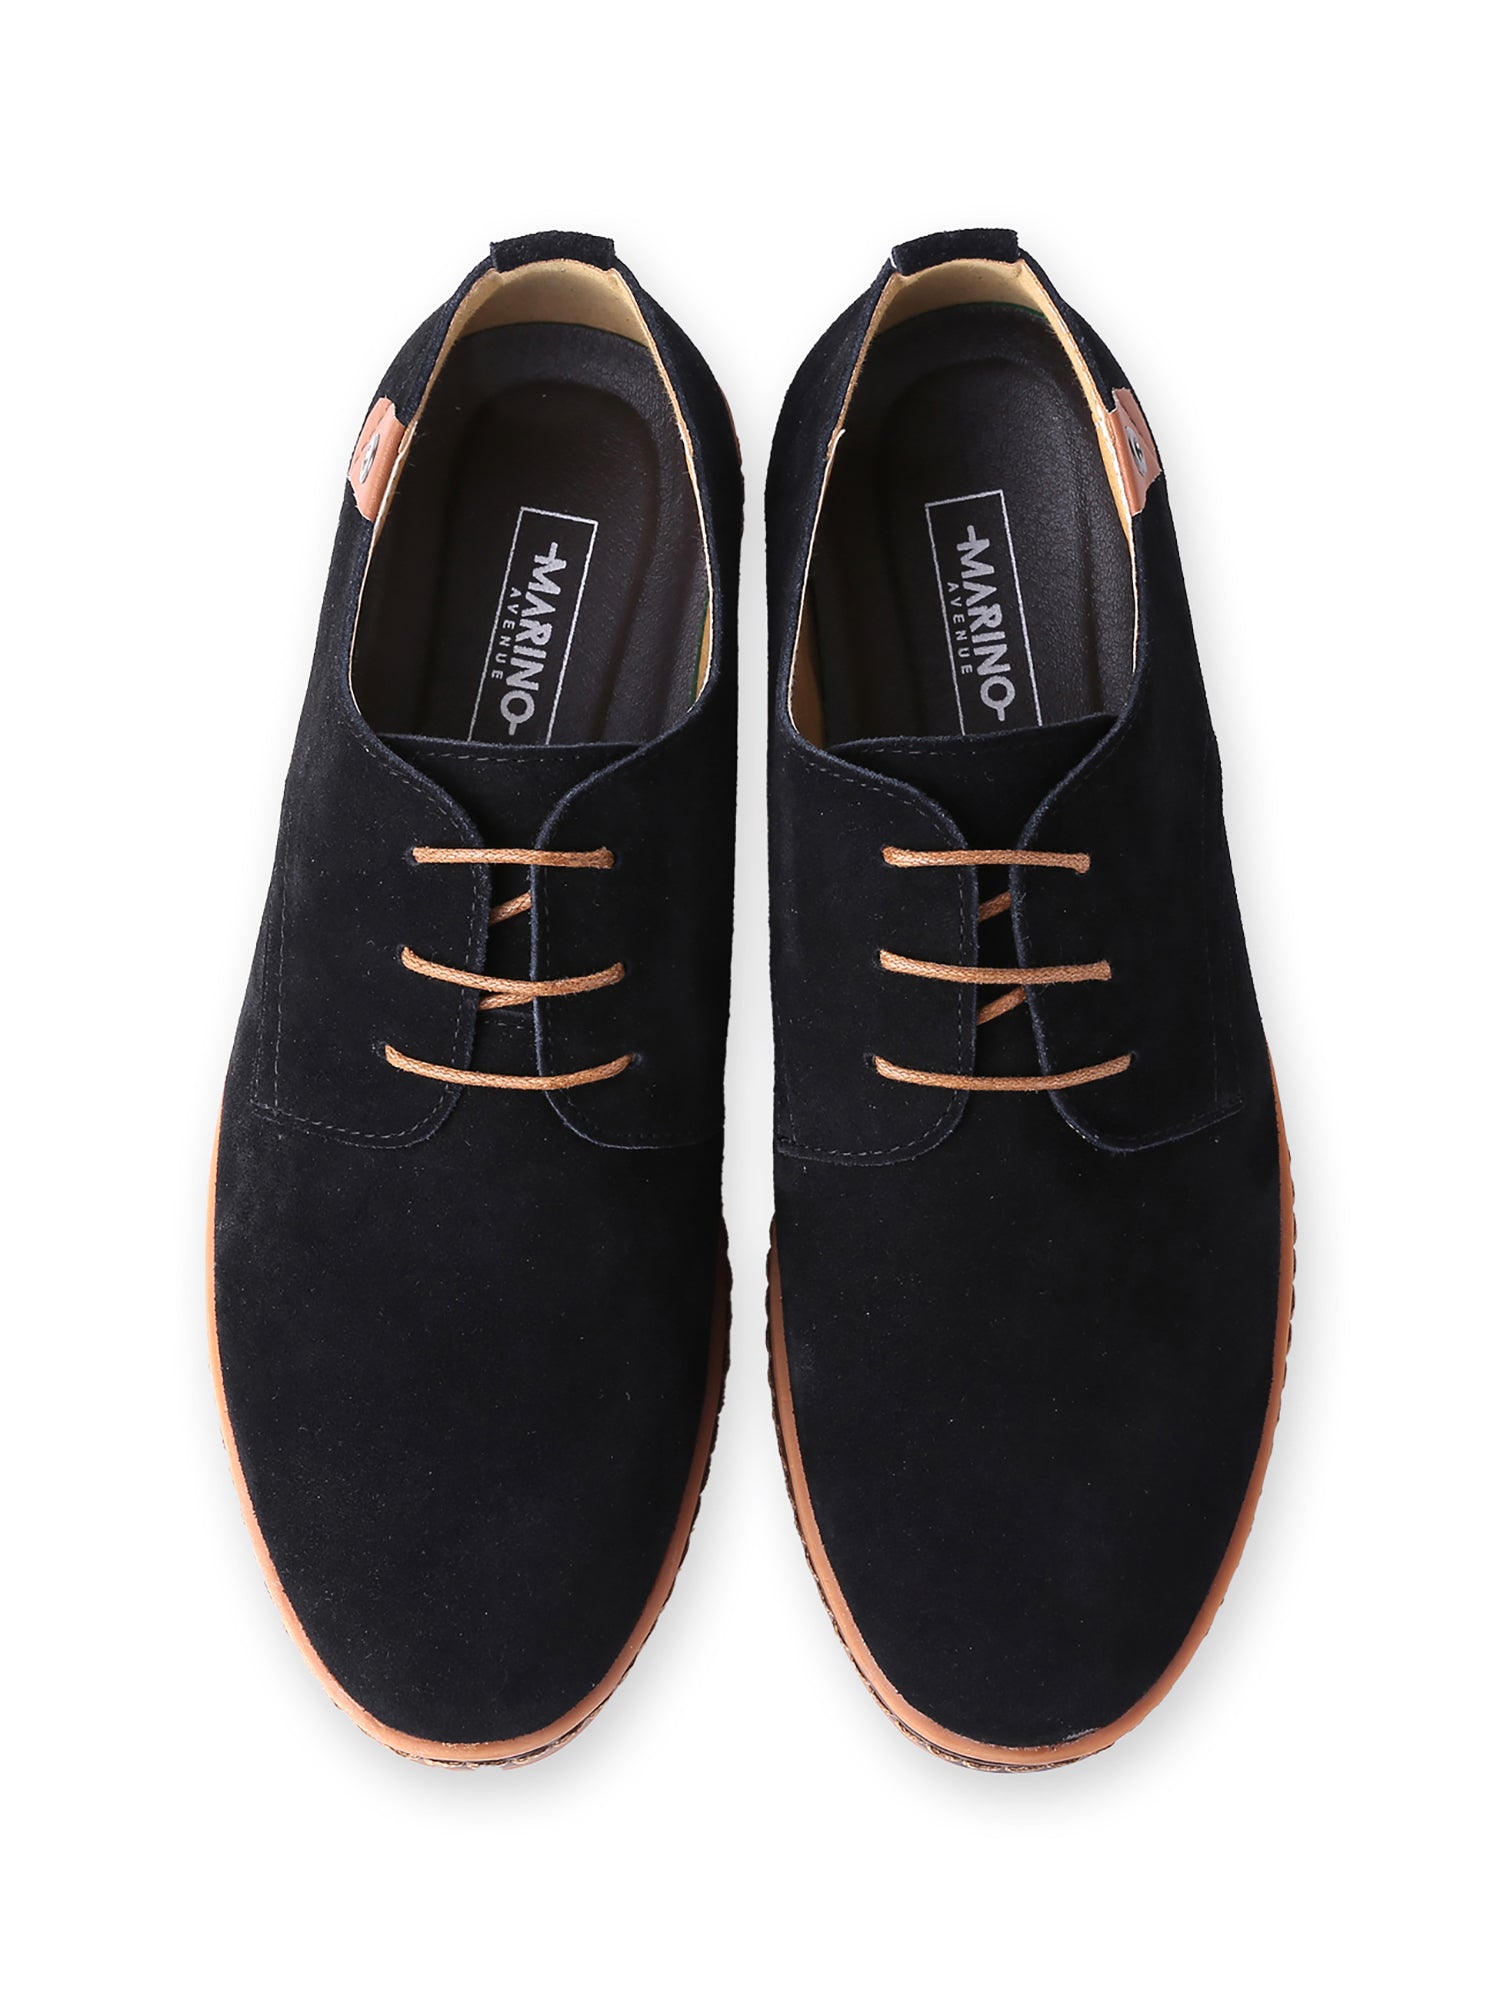 marino suede oxford dress shoes